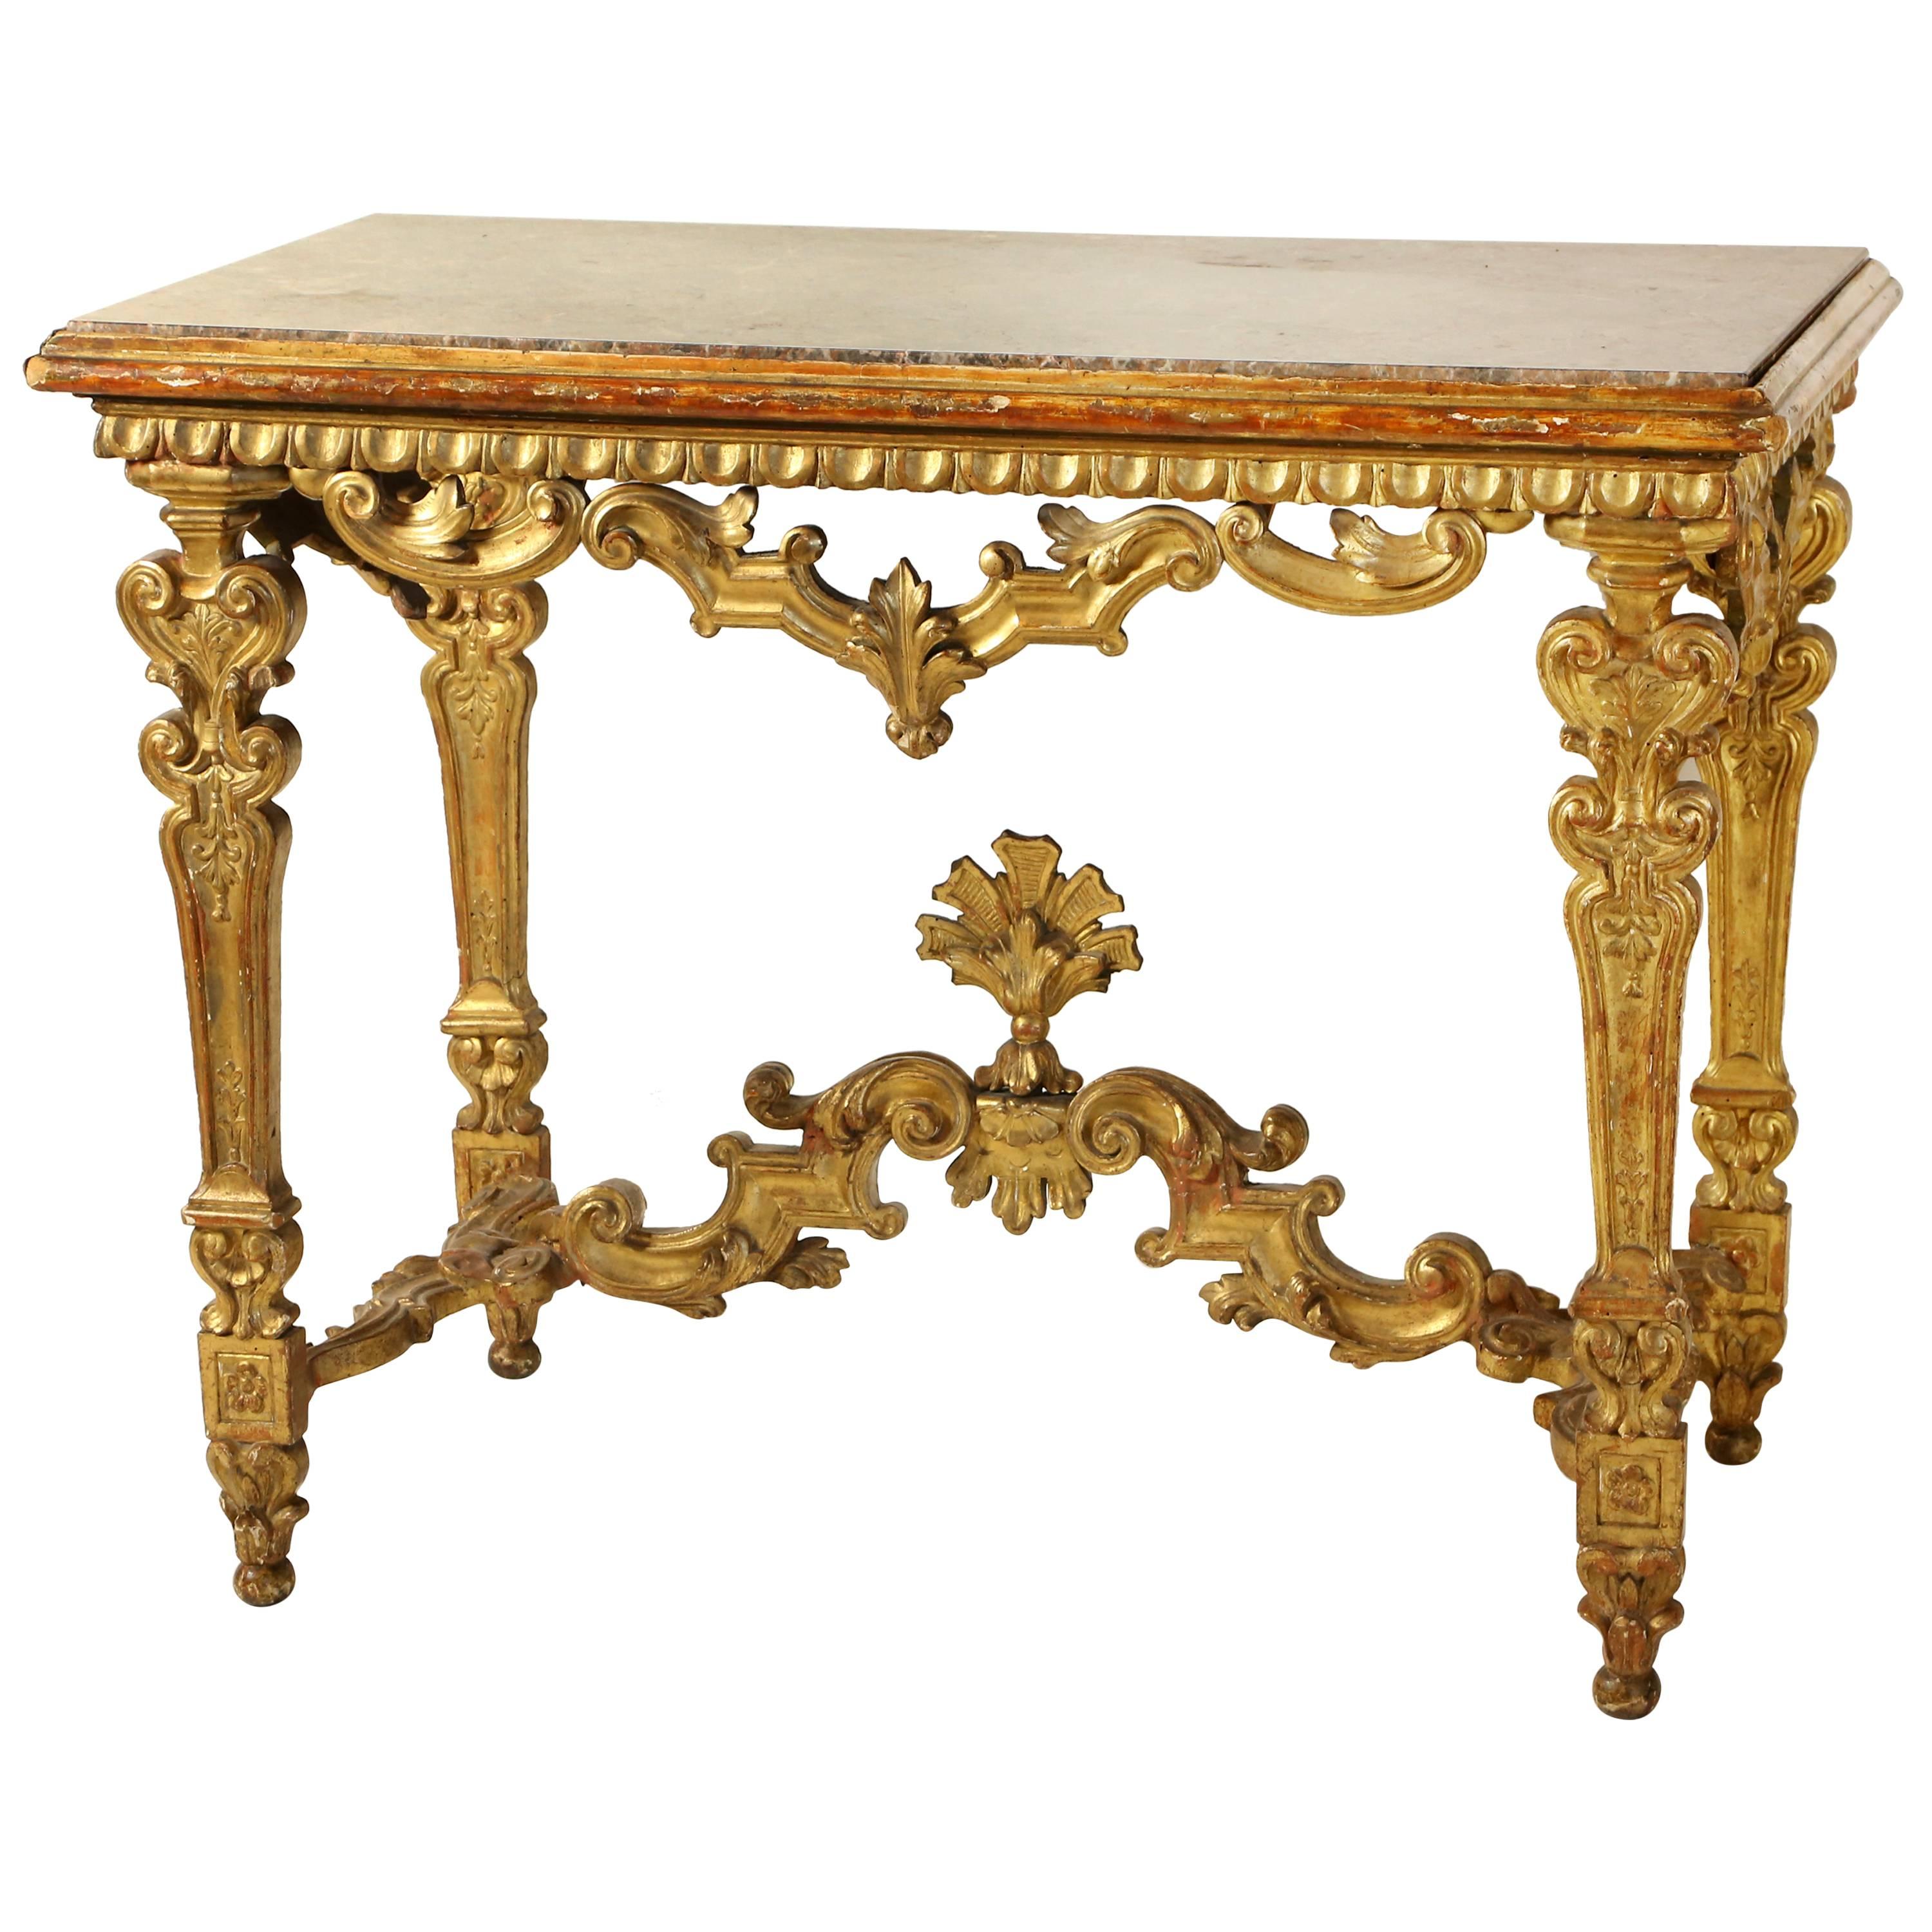 Antique Italian Giltwood and Marble-Topped Console